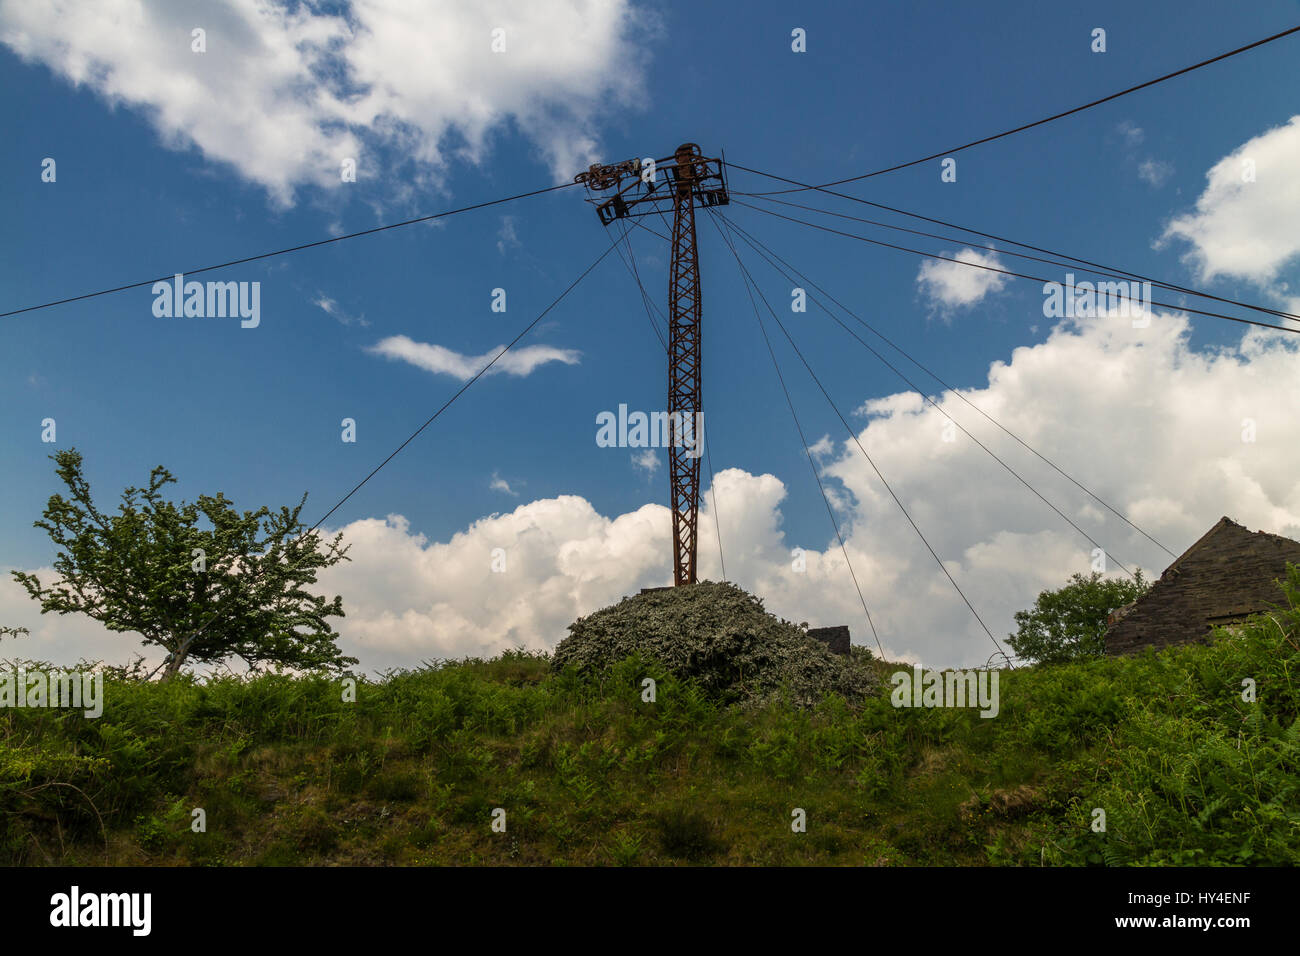 Overhead cableway or Blondin tower used in Welsh Slate industry, Stock Photo